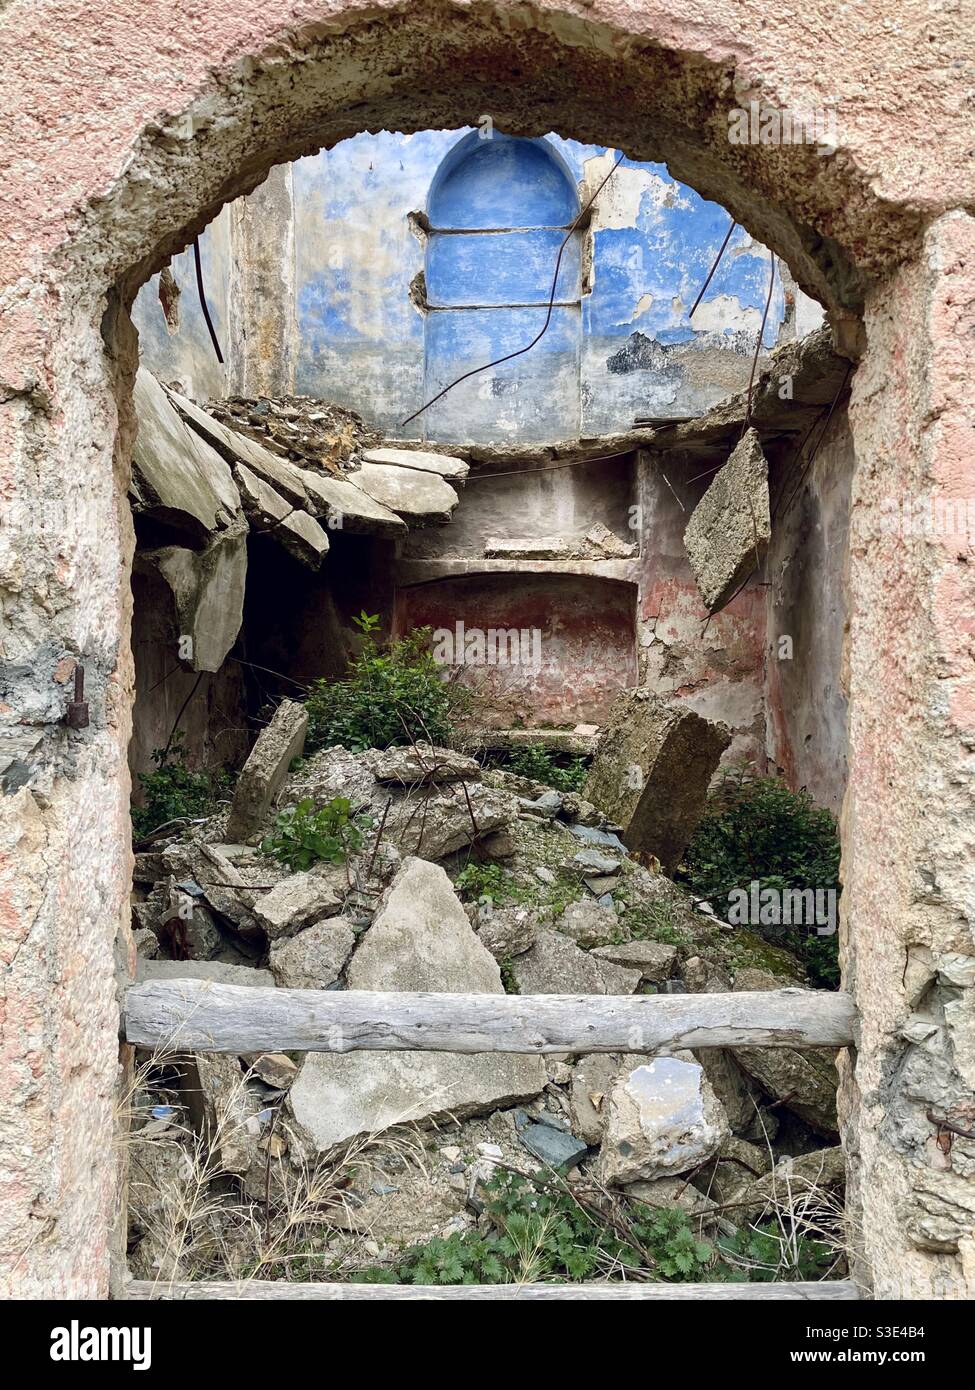 The ruins of an old building or house, its space  taken back by wild plants and vegetation, in the ghost town of Gairo vecchio, an abandoned place in the province of Ogliastra, Sardinia. Stock Photo